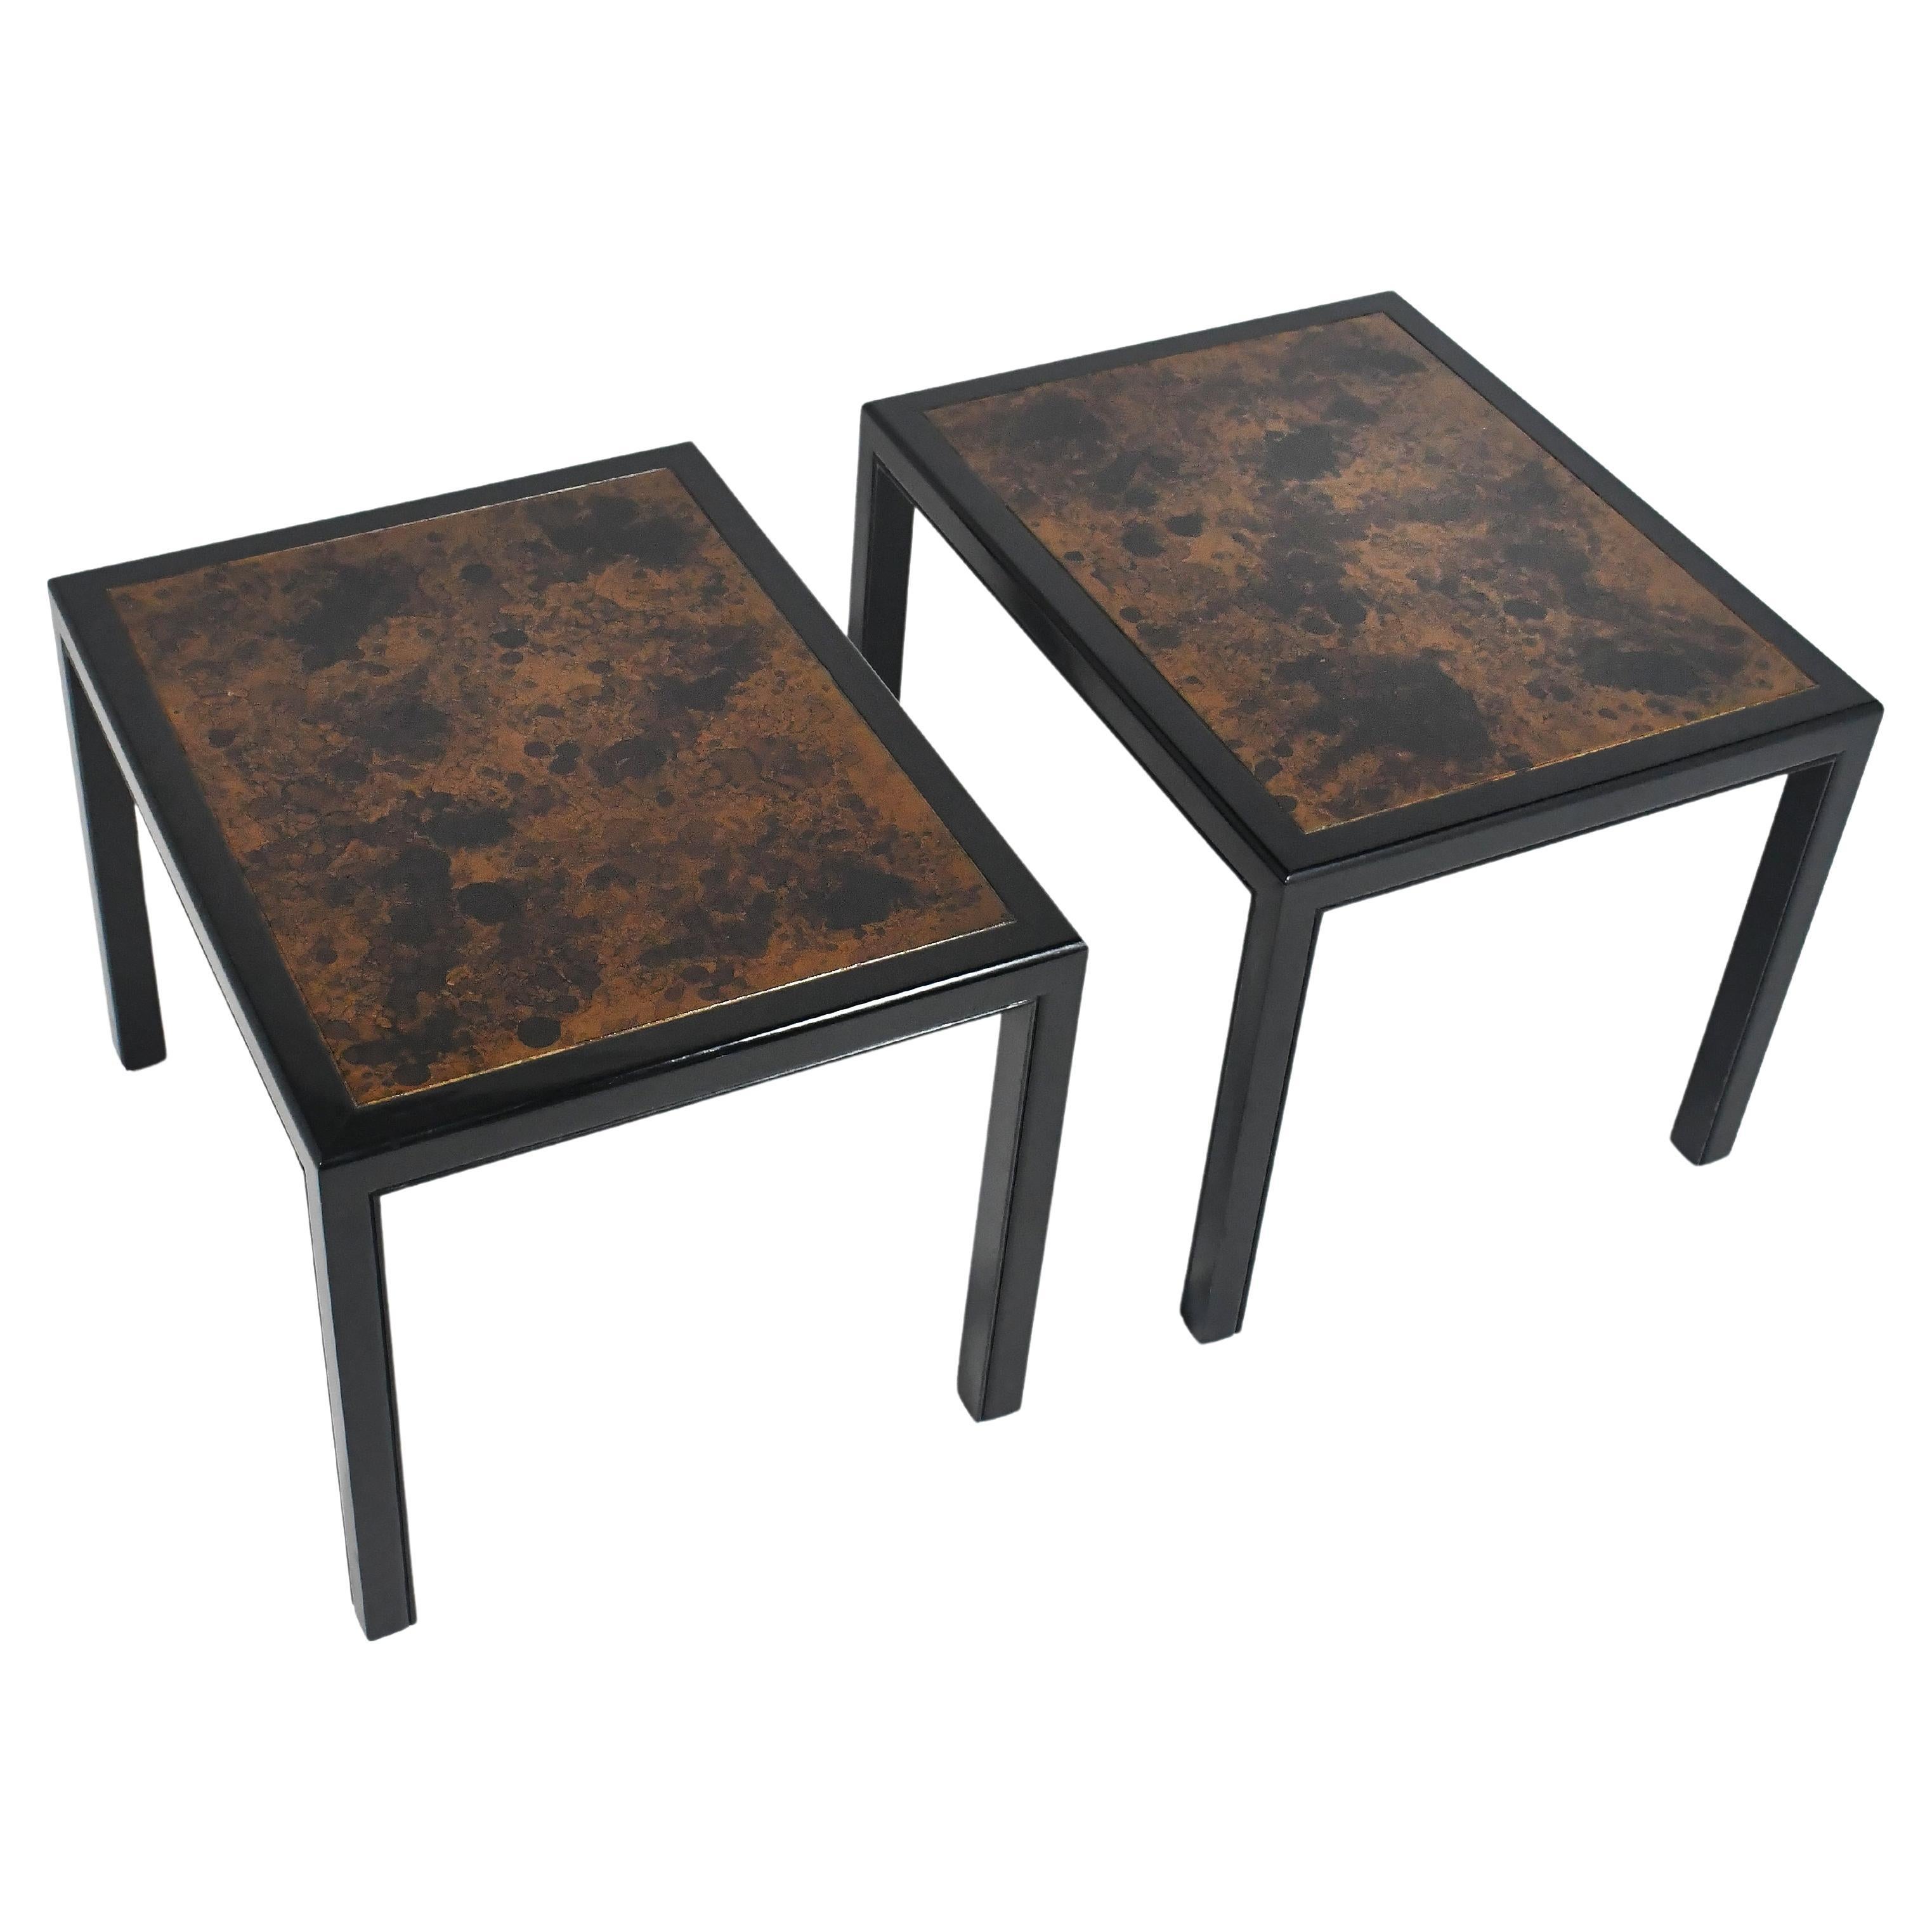 Pair of End Tables Attributed to Harvey Probber